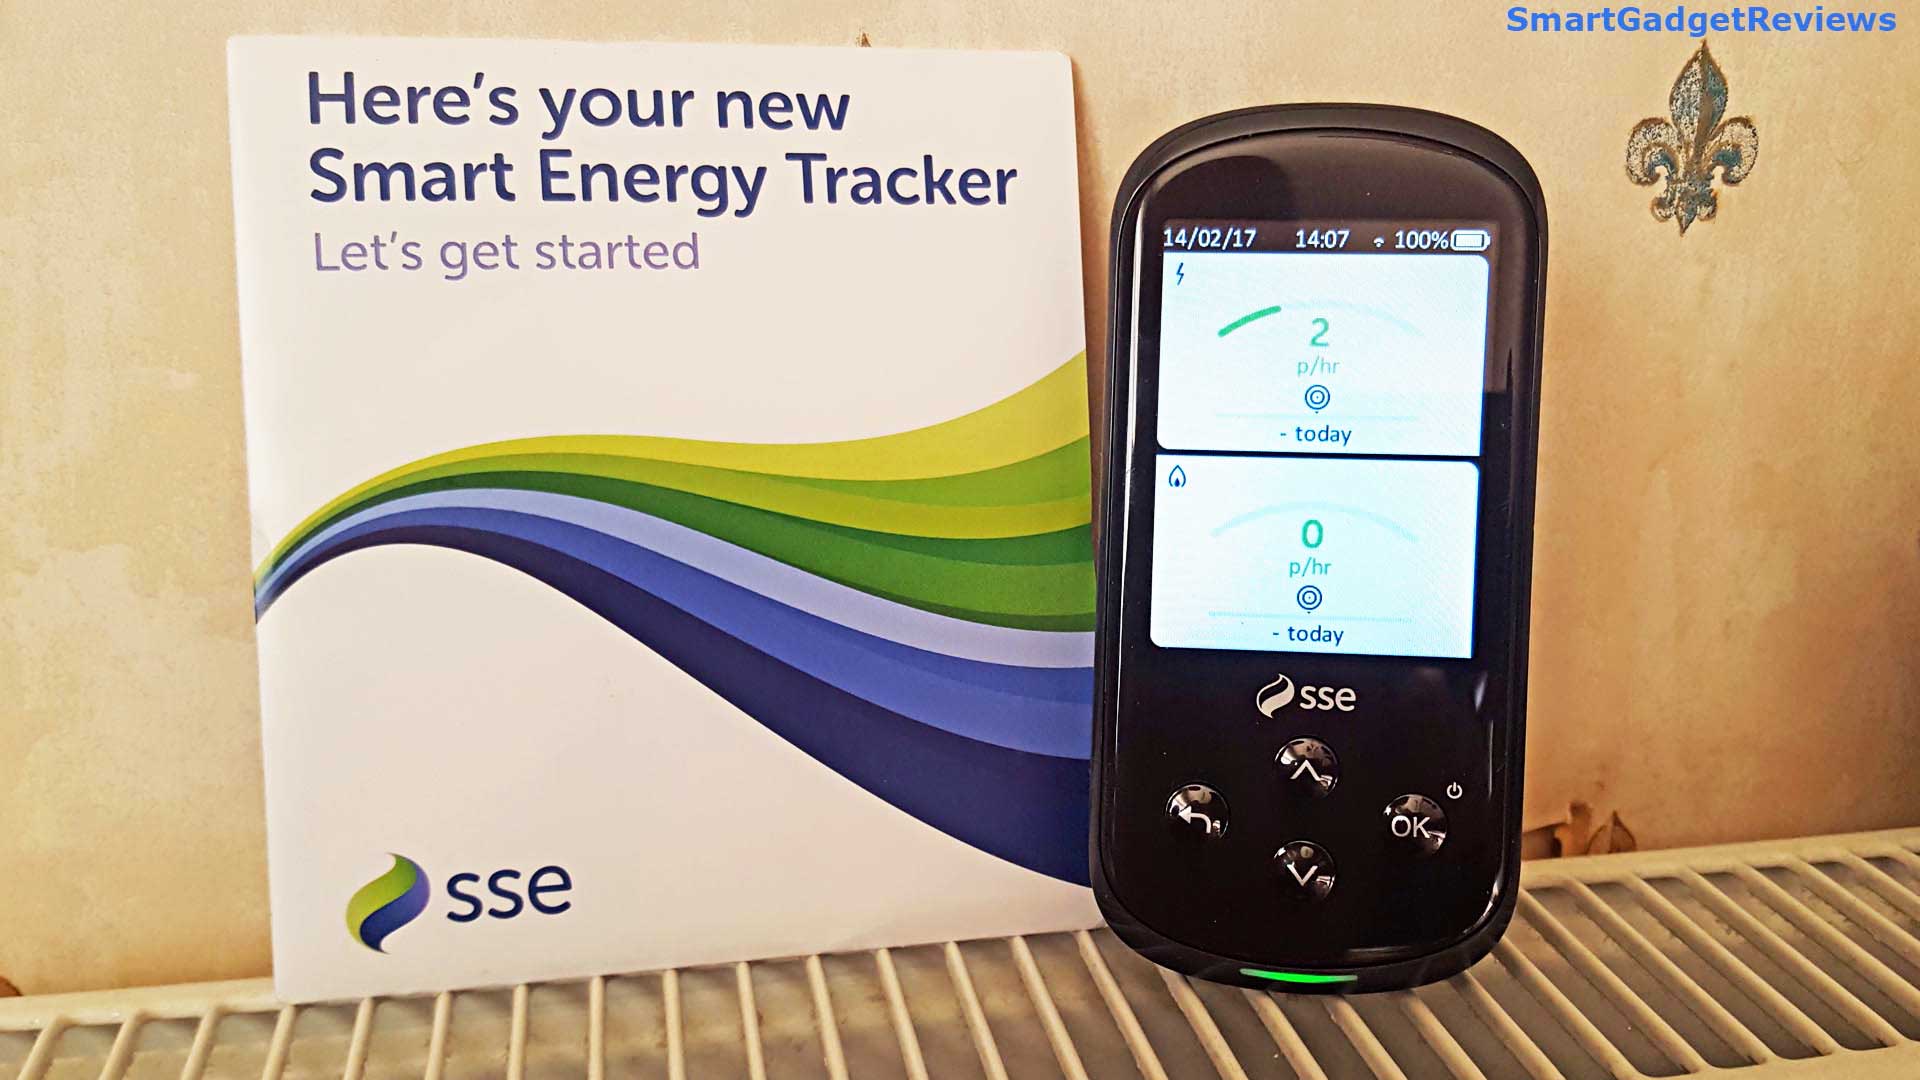 Today the 14th we are getting Smart Energy Meters installed.